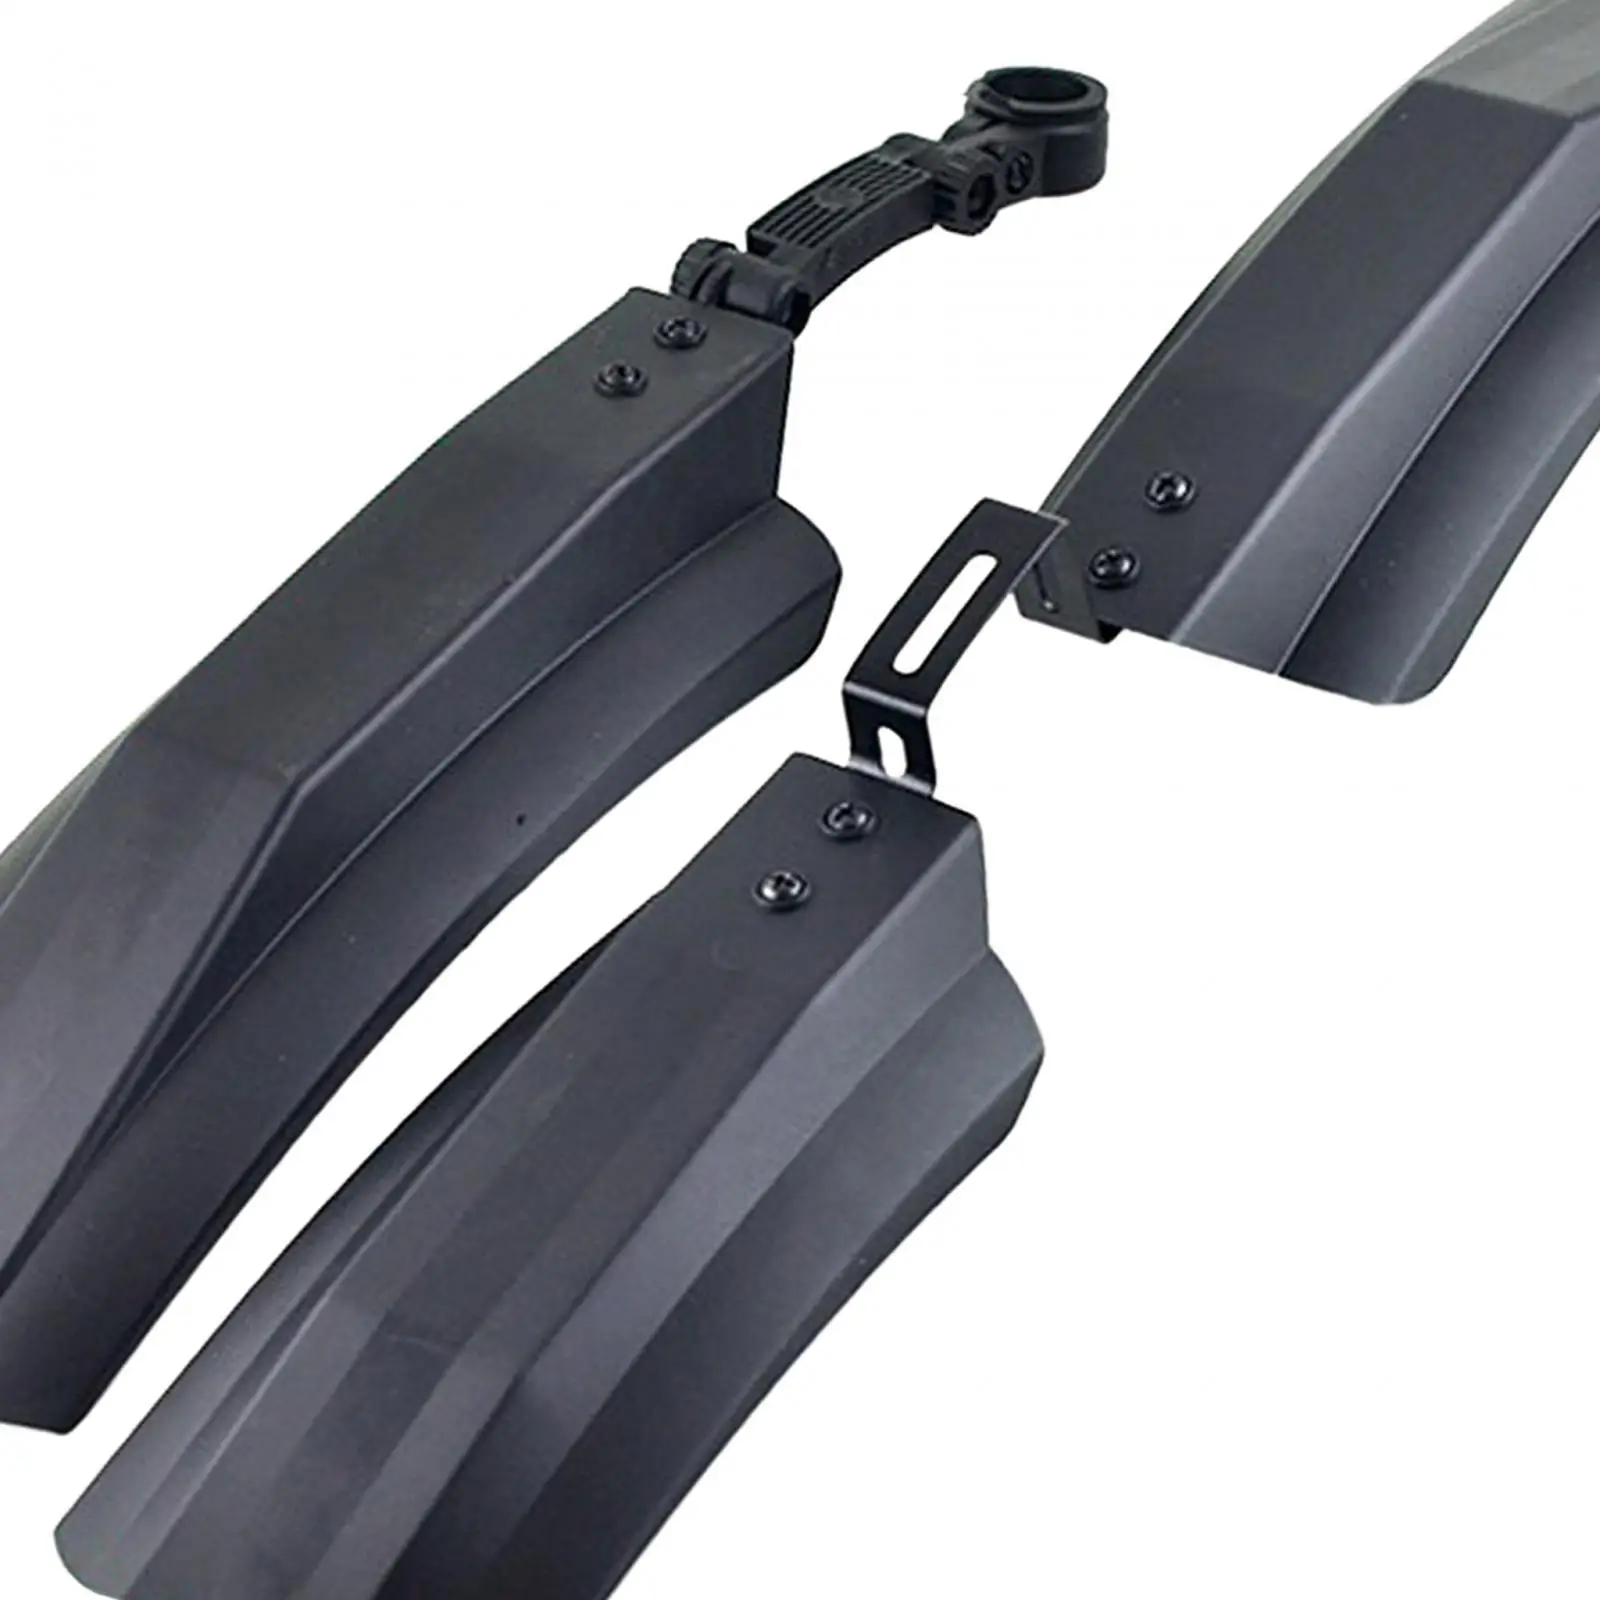 Bicycle Mudguard Bike Fenders Front Rear Fenders, Lengthen Widen Mud Guard, Bike Mudflap for Mountain Bikes, Snow Bicycle